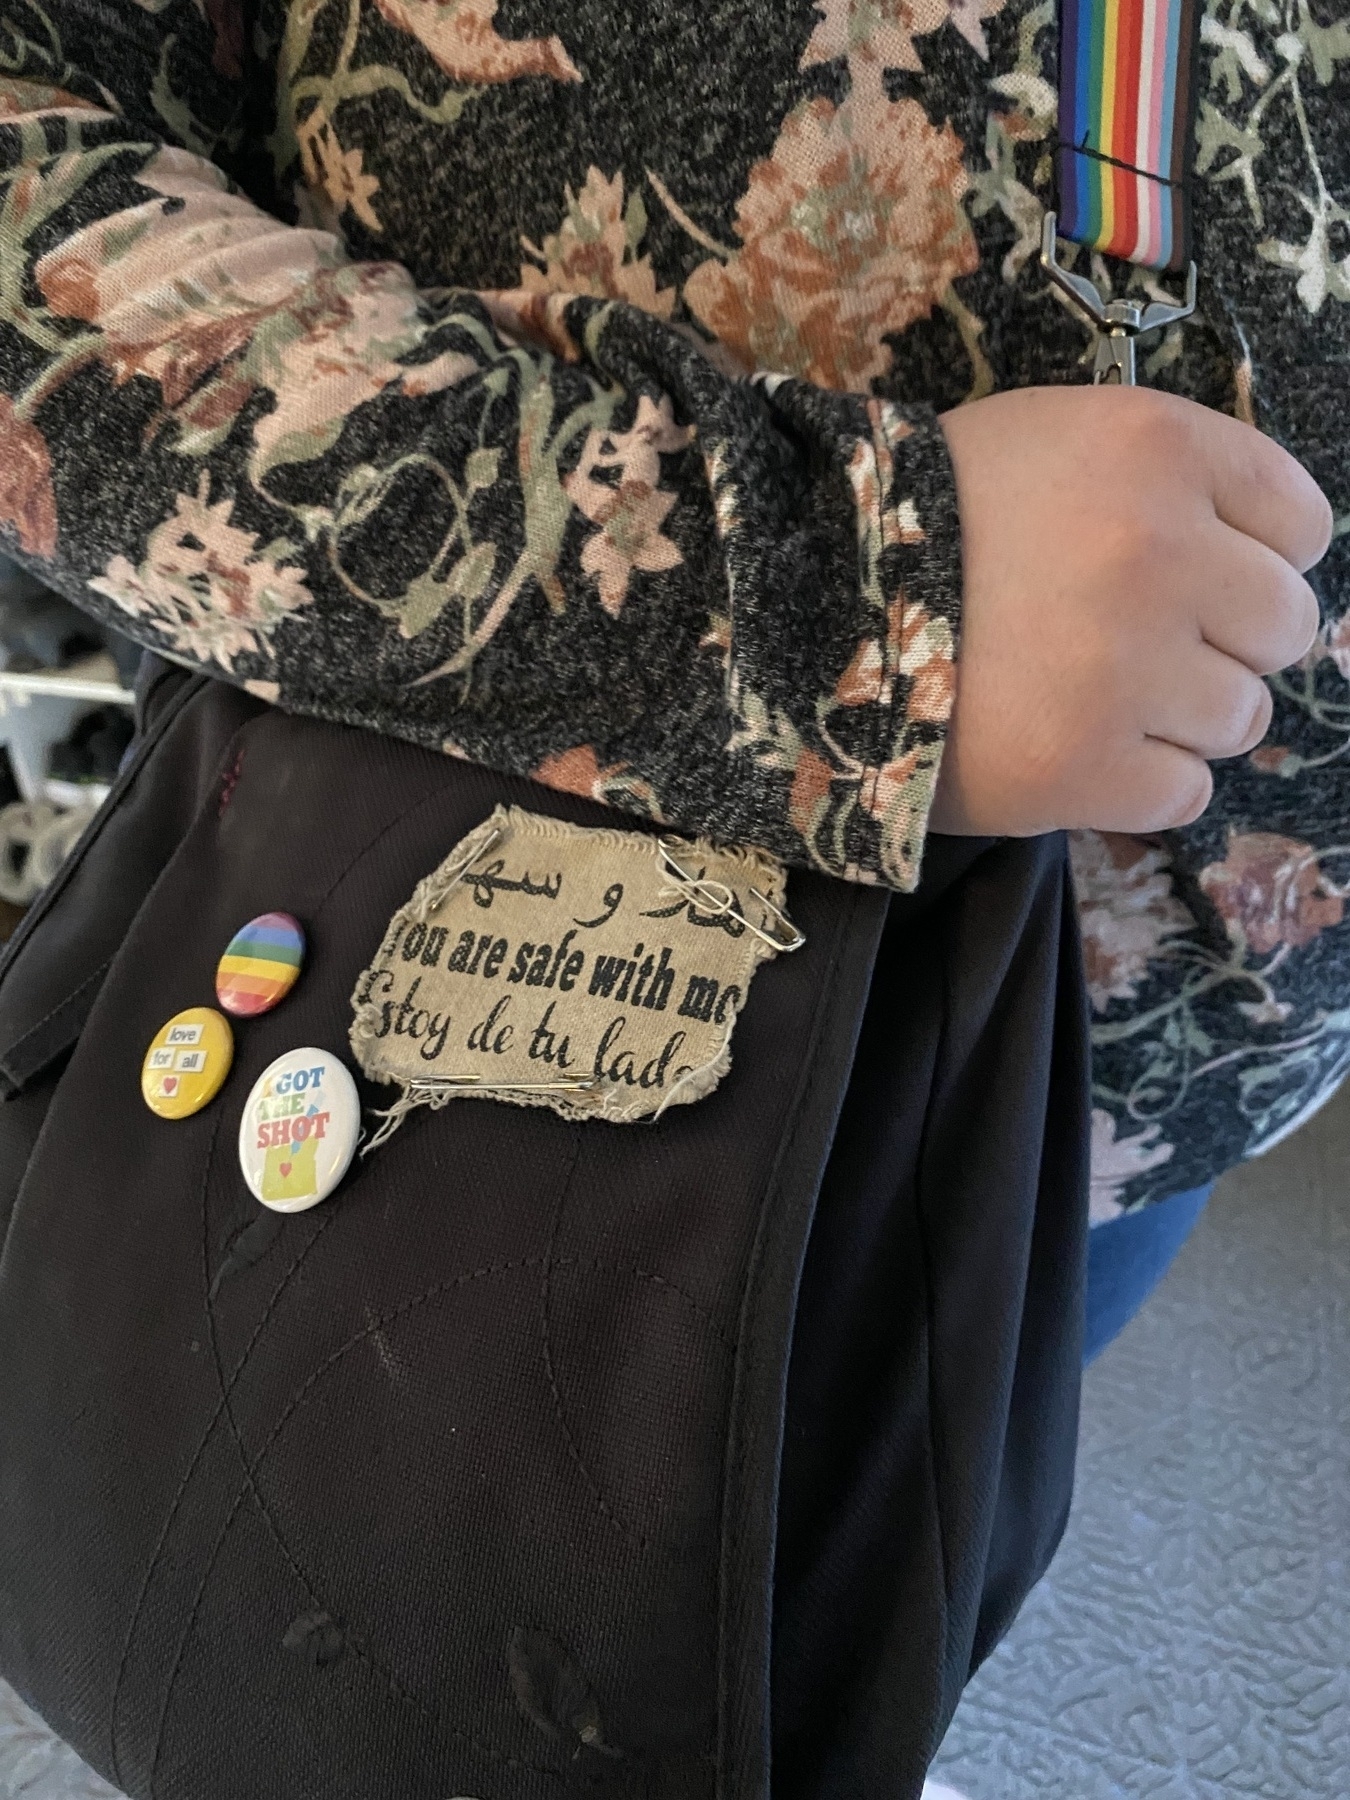 Woman wearing black, cloth purse over shoulder. There is a patch that reads “You are safe with me.” There is also a round pride pin. 